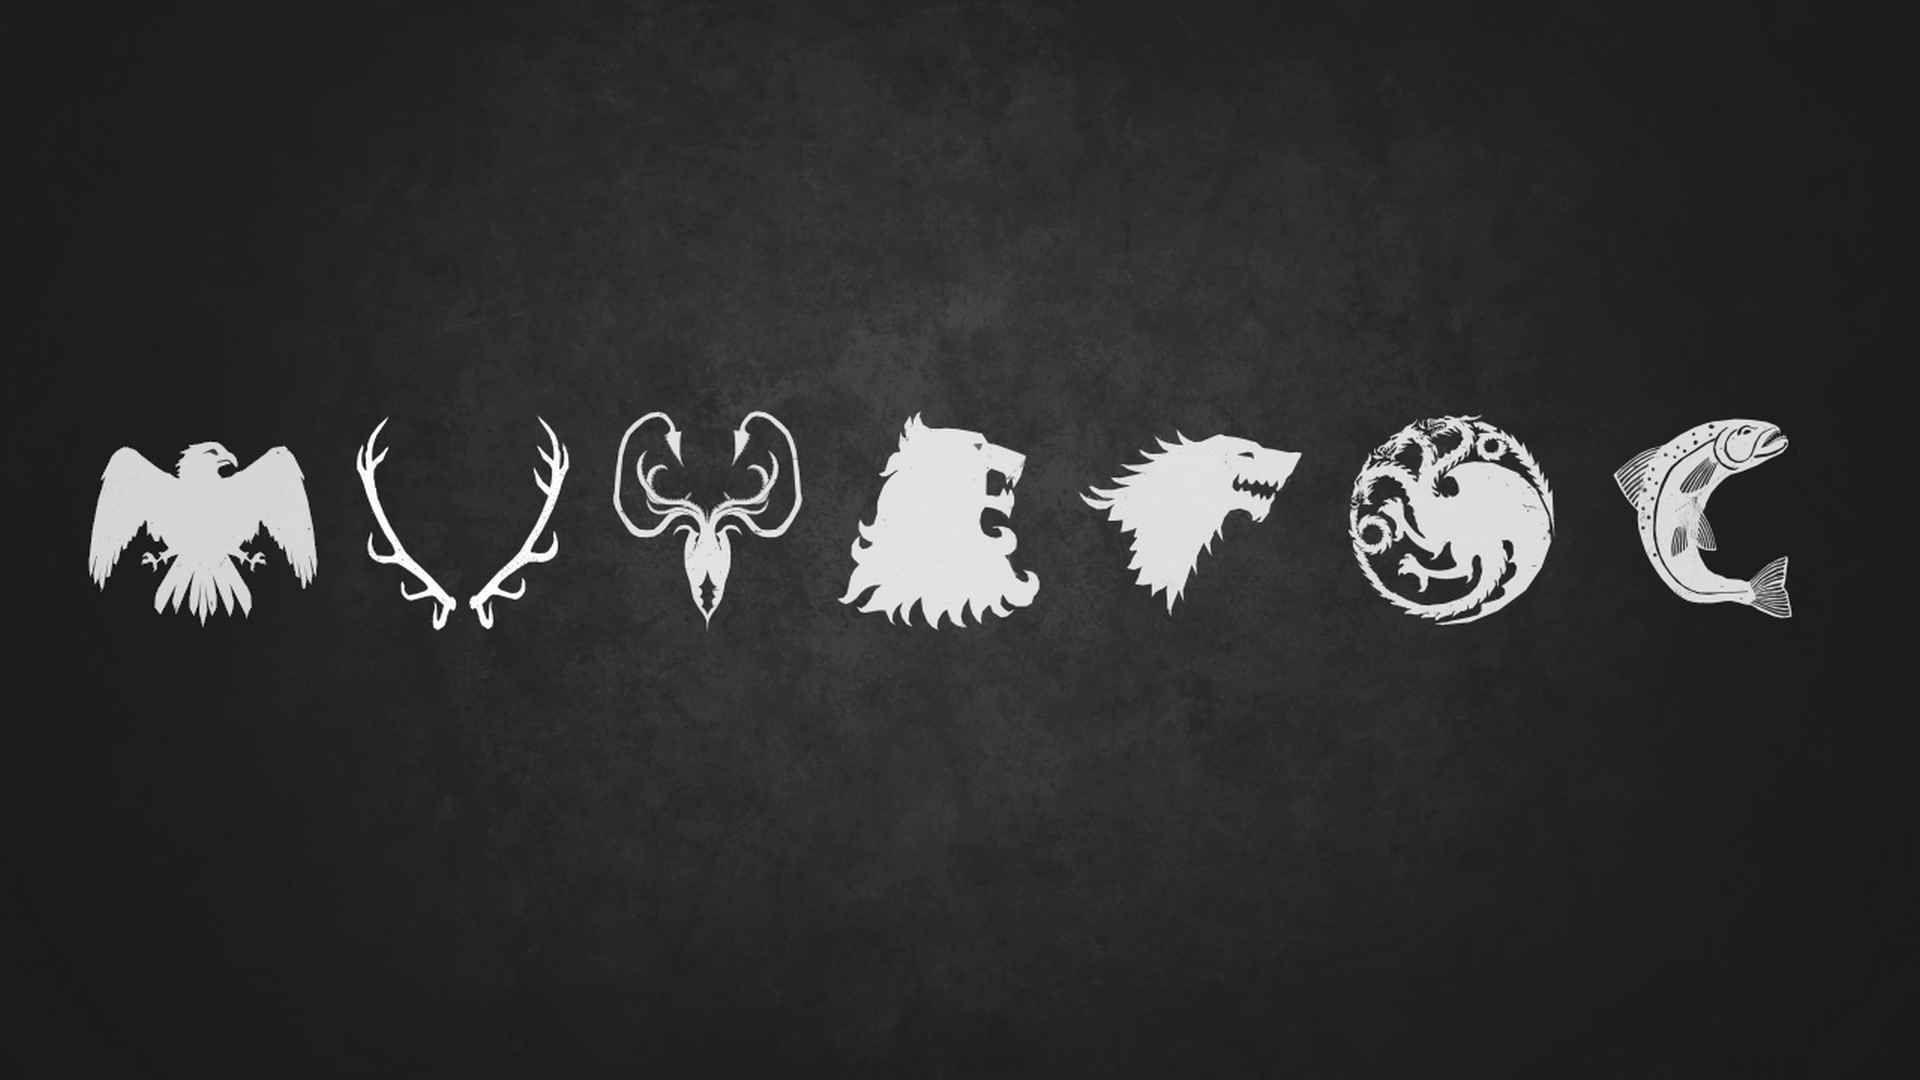 Game of Thrones Sigil Wallpaper Free Game of Thrones